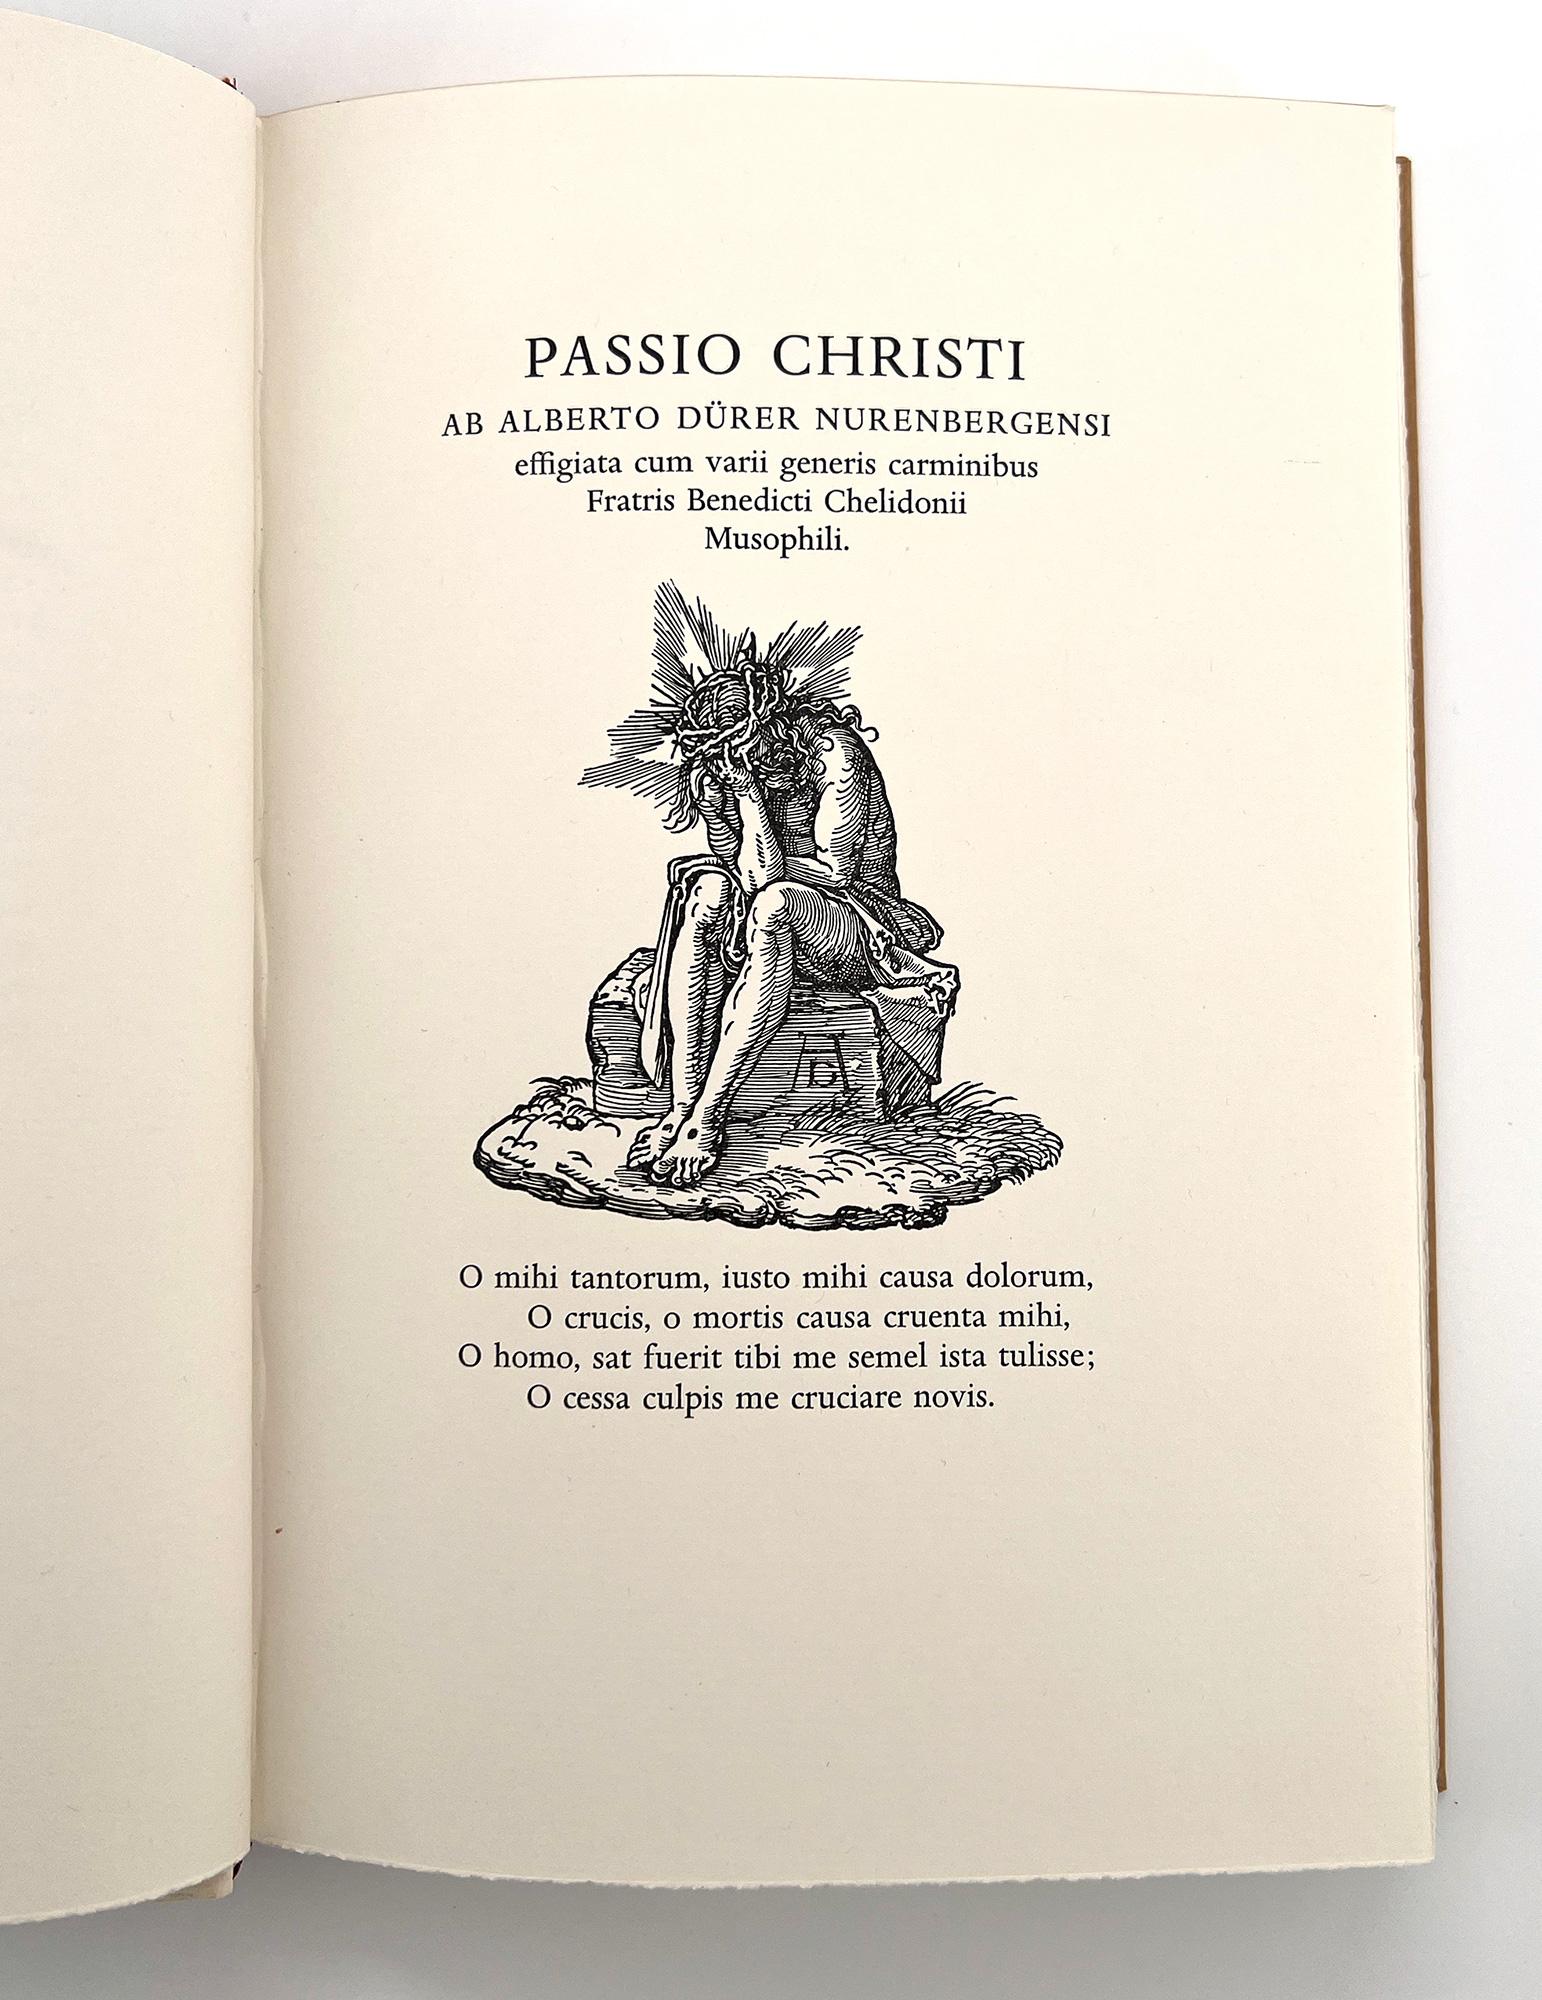 A lush LIMITED EDITION of Albrech Dürer's woodcuts illustrating the Passion of Christ, printed by OFFICINA BODONI in Verona.

Albrecht Dürer. La Passione. 
Verona: Officina Bodoni, 1971. Limited Edition. 
8vo; 9 x 6 in. (230 x 153 mm); 222 pp.